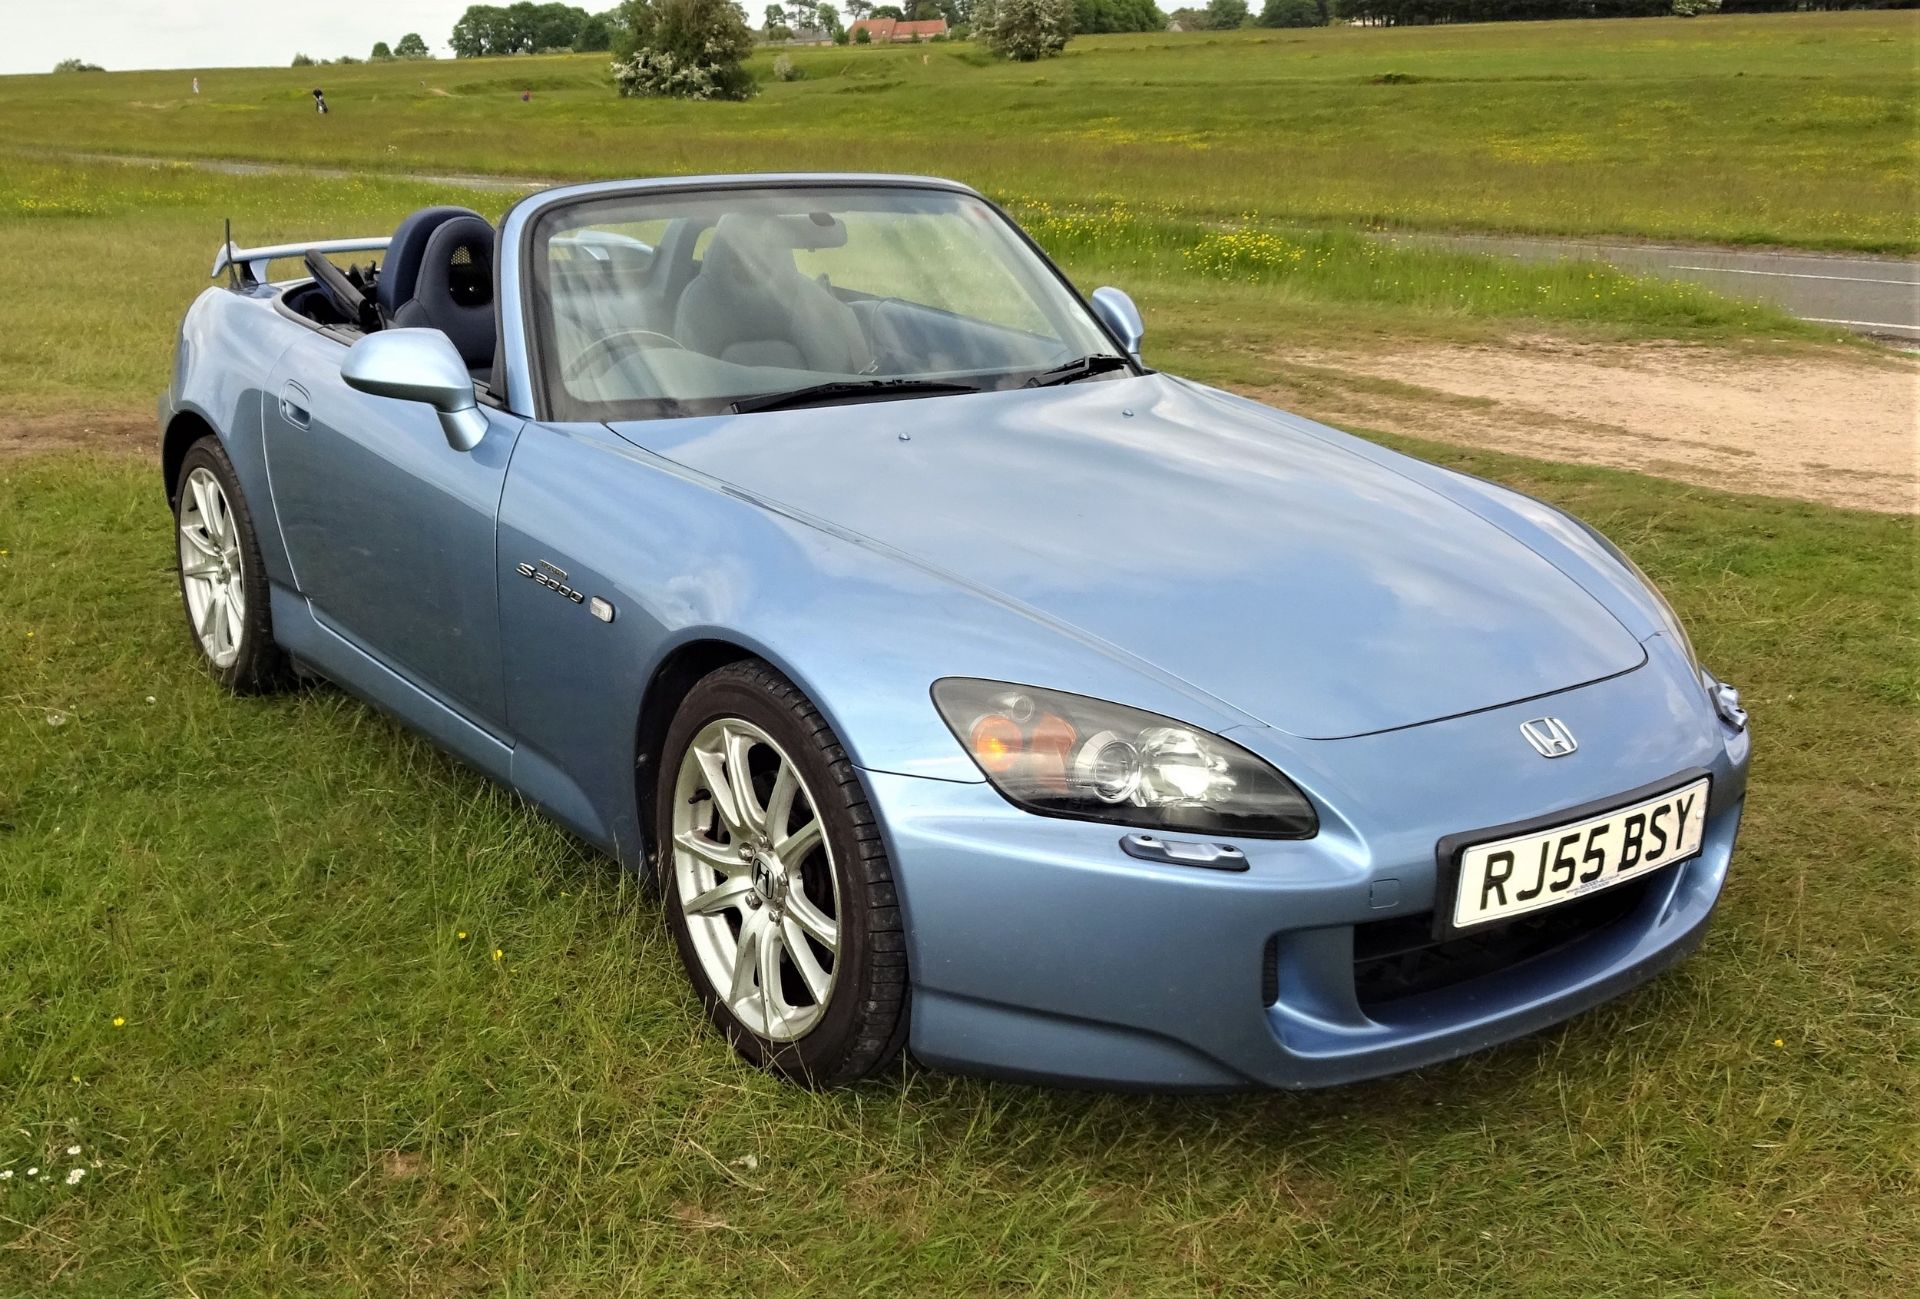 2005 HONDA S2000 Registration Number: RJ55 BSY Chassis Number: JHMPA11305S202028 - In current